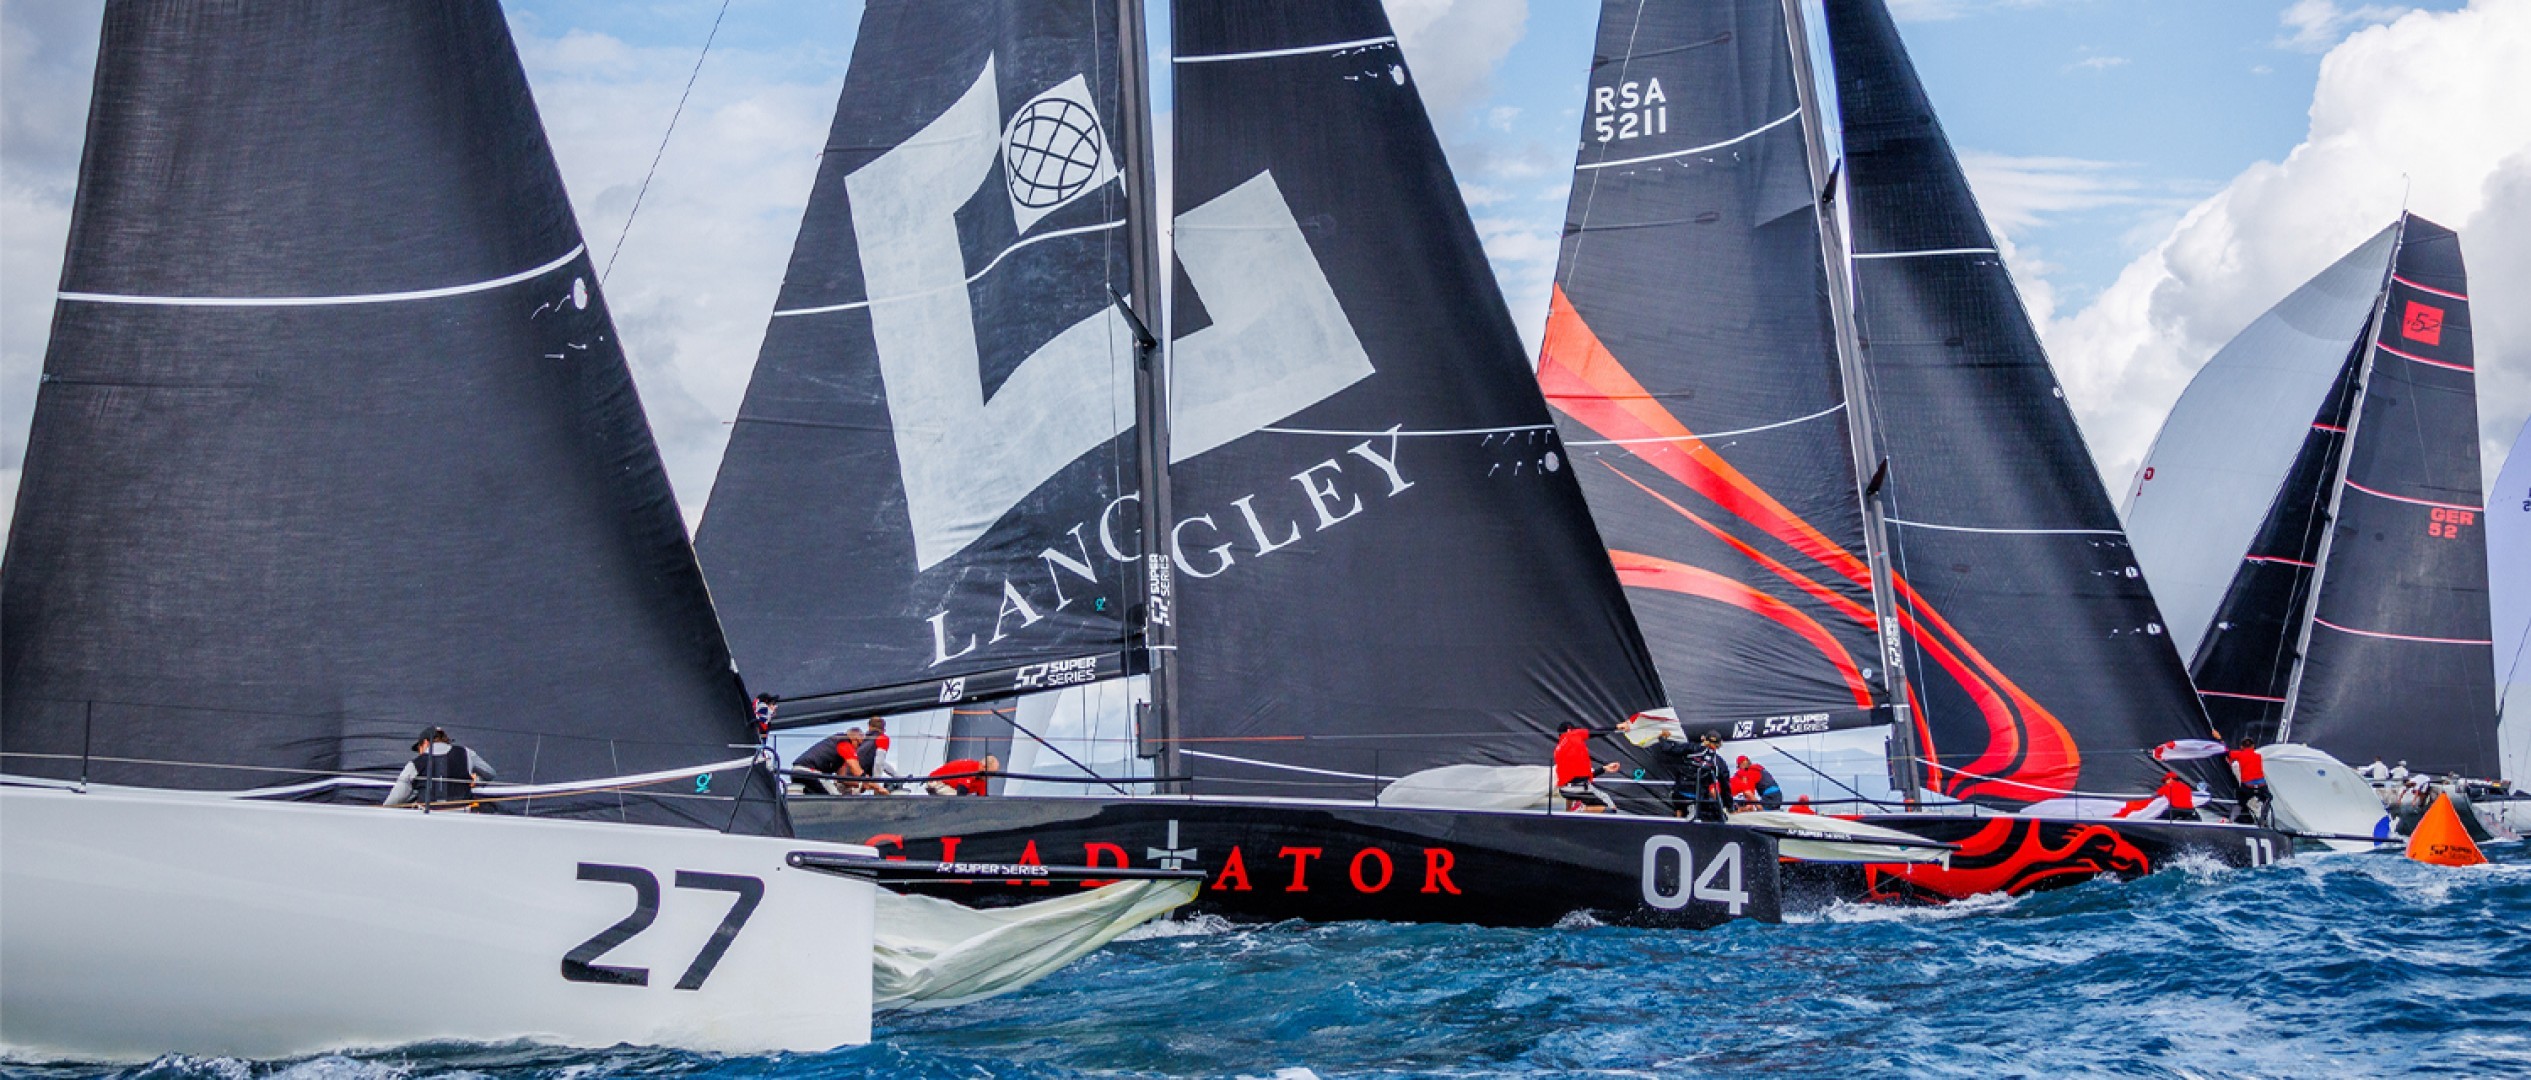 52 Super Series, Gladiator relies on Guille Parada